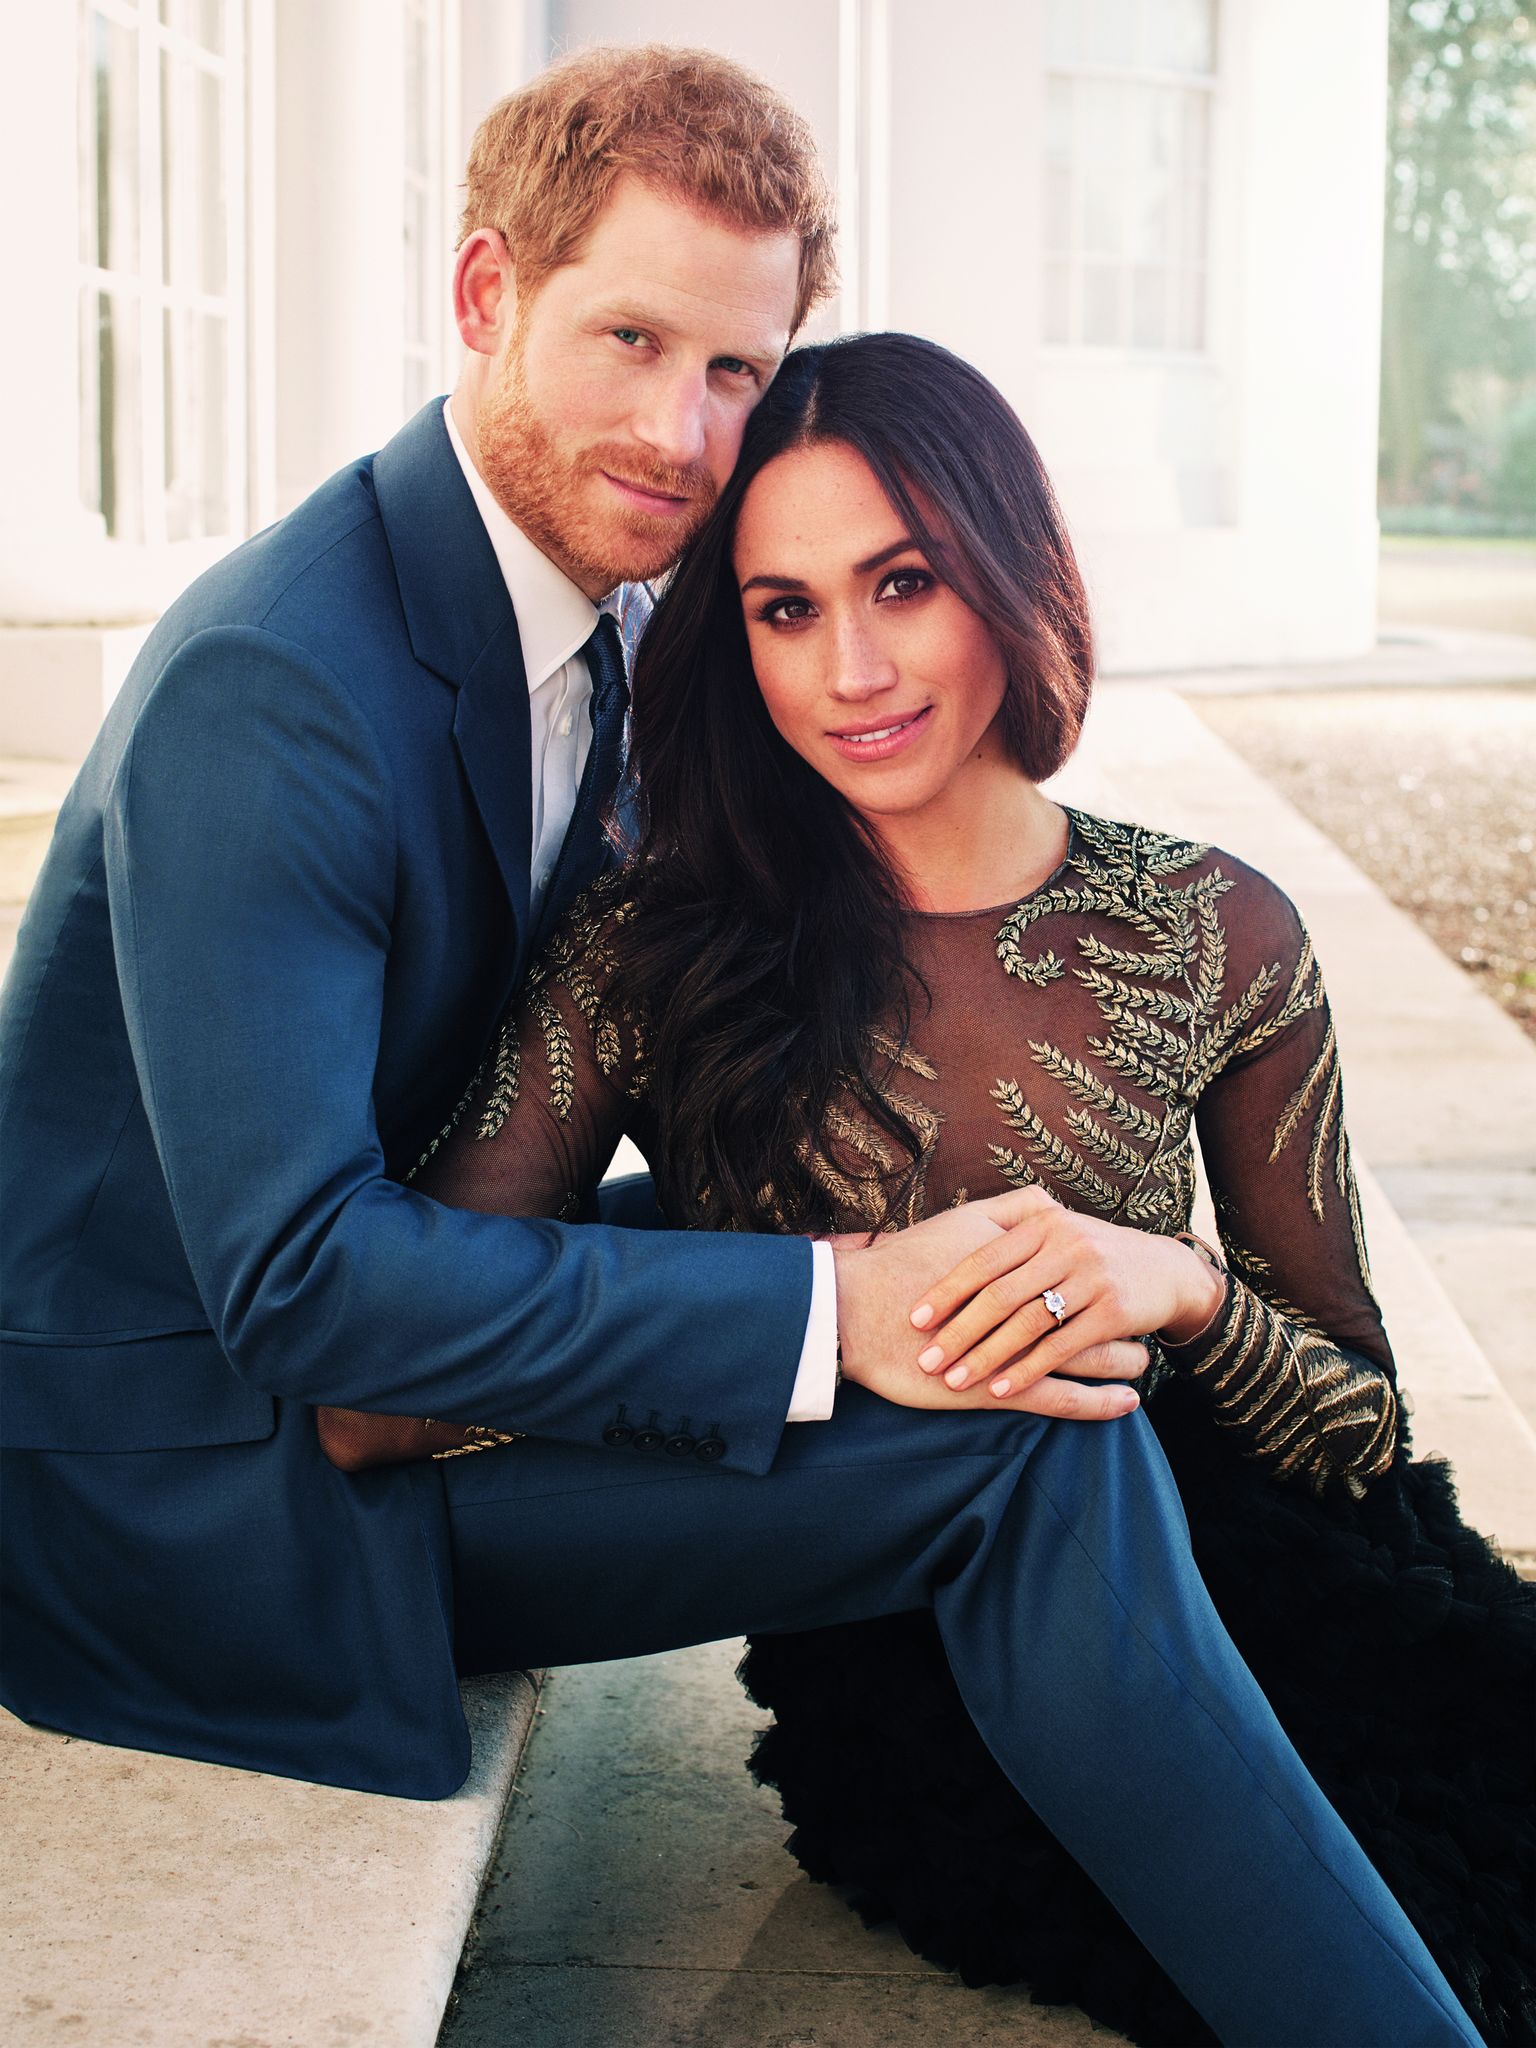 Prince Harry And Meghan Markle Engagement | Getty Images